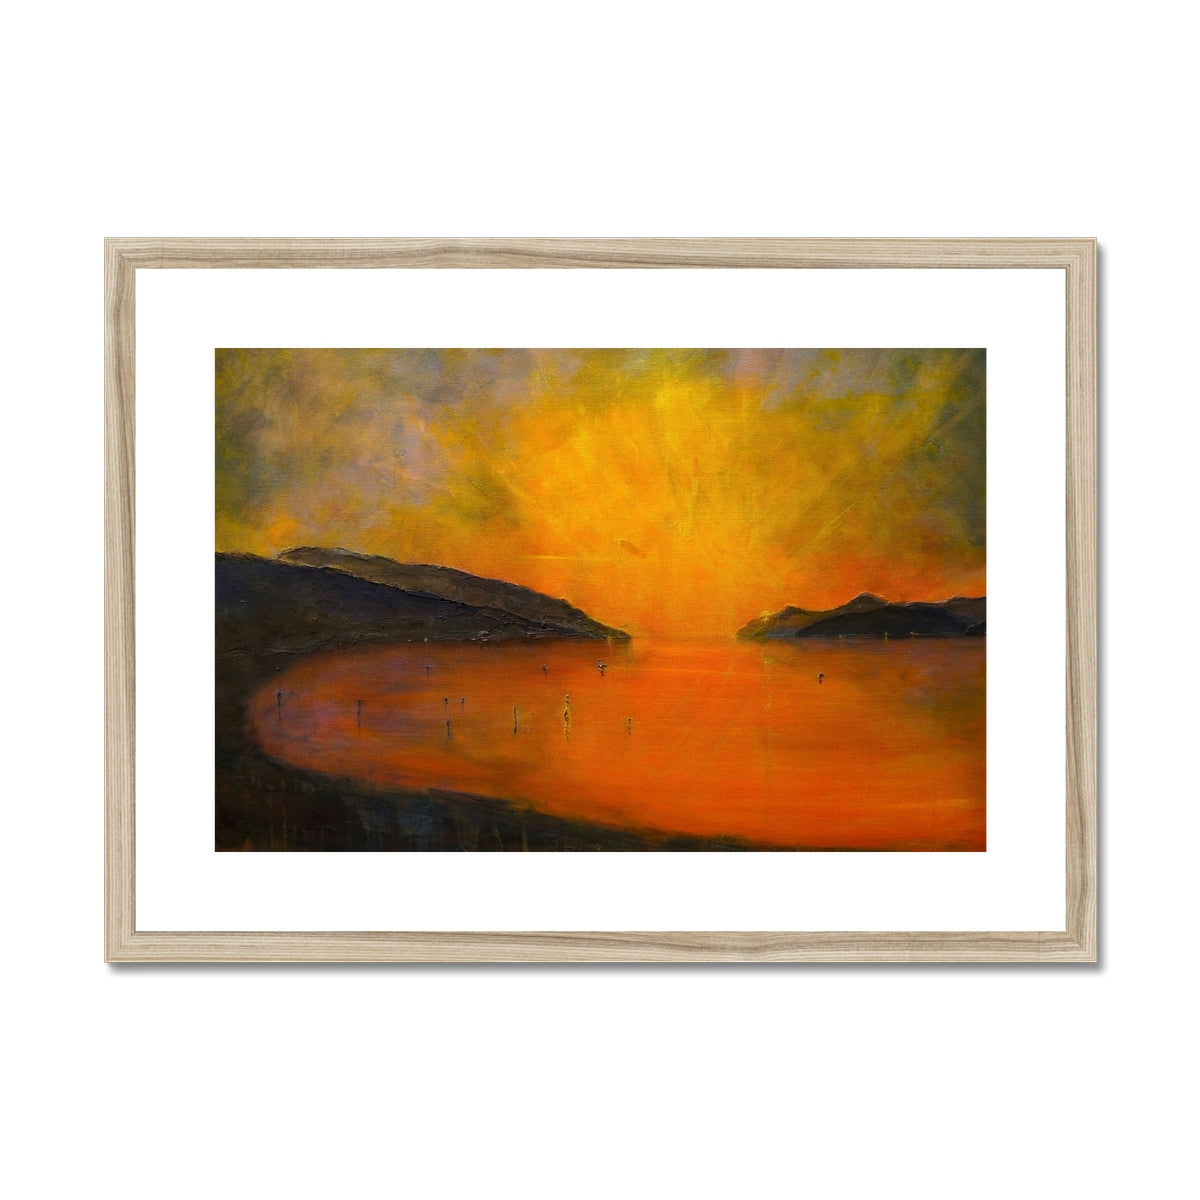 Loch Ness Sunset Painting | Framed & Mounted Prints From Scotland-Framed & Mounted Prints-Scottish Lochs & Mountains Art Gallery-A2 Landscape-Natural Frame-Paintings, Prints, Homeware, Art Gifts From Scotland By Scottish Artist Kevin Hunter